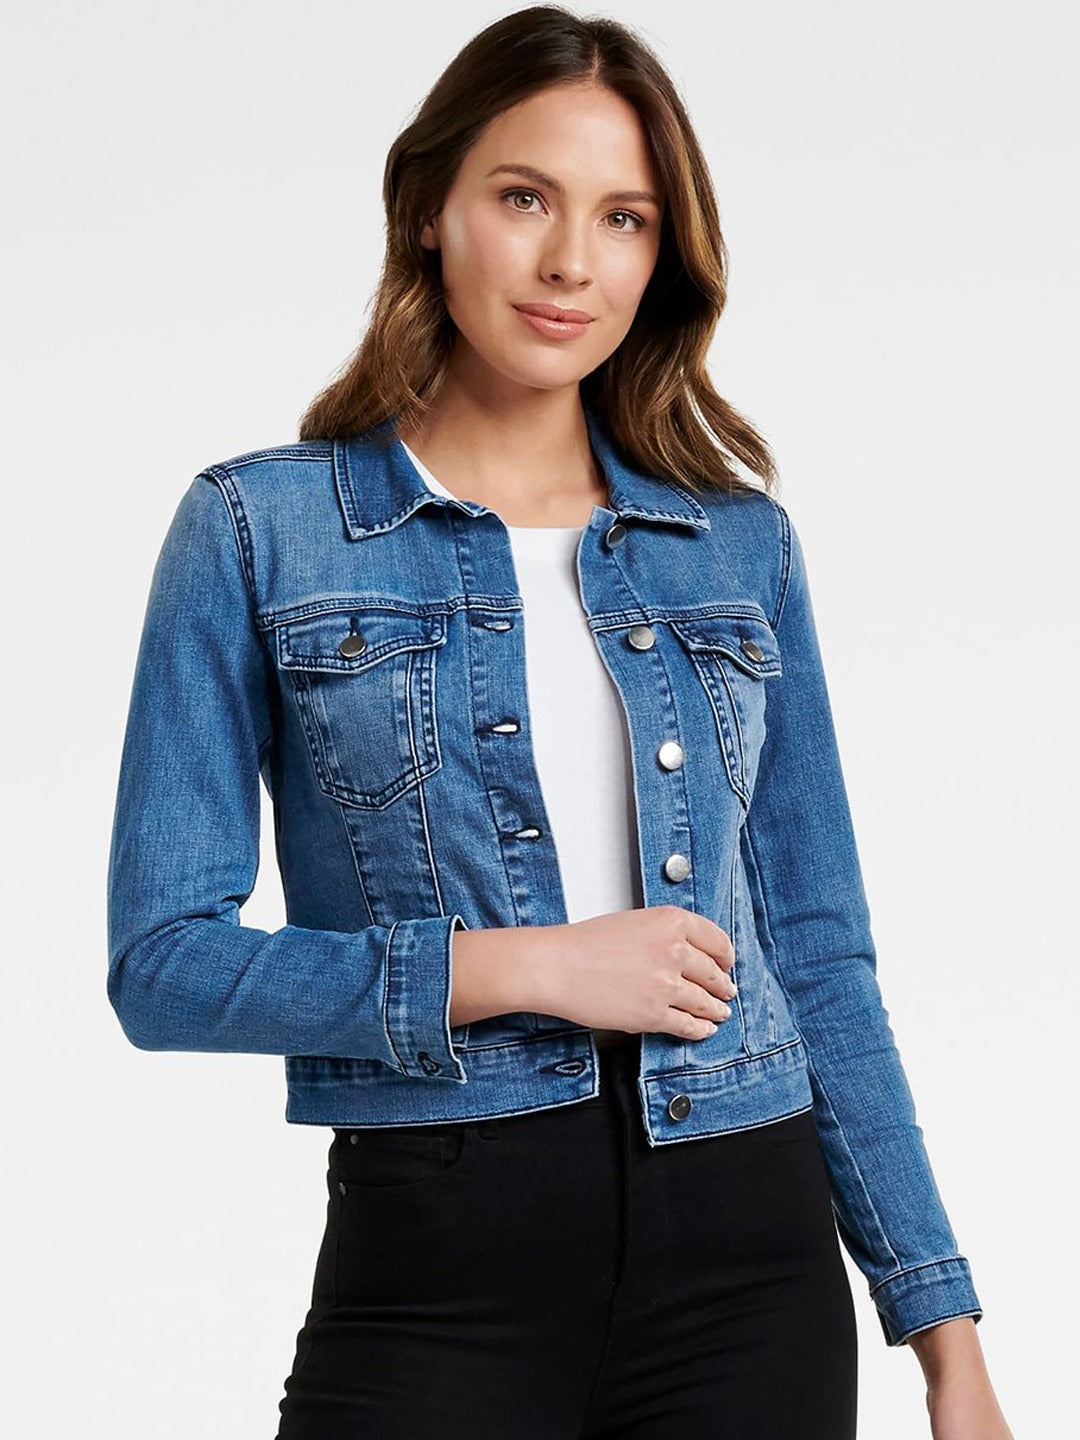 Stylish women's blue denim jacket with button closure and classic jean detailing